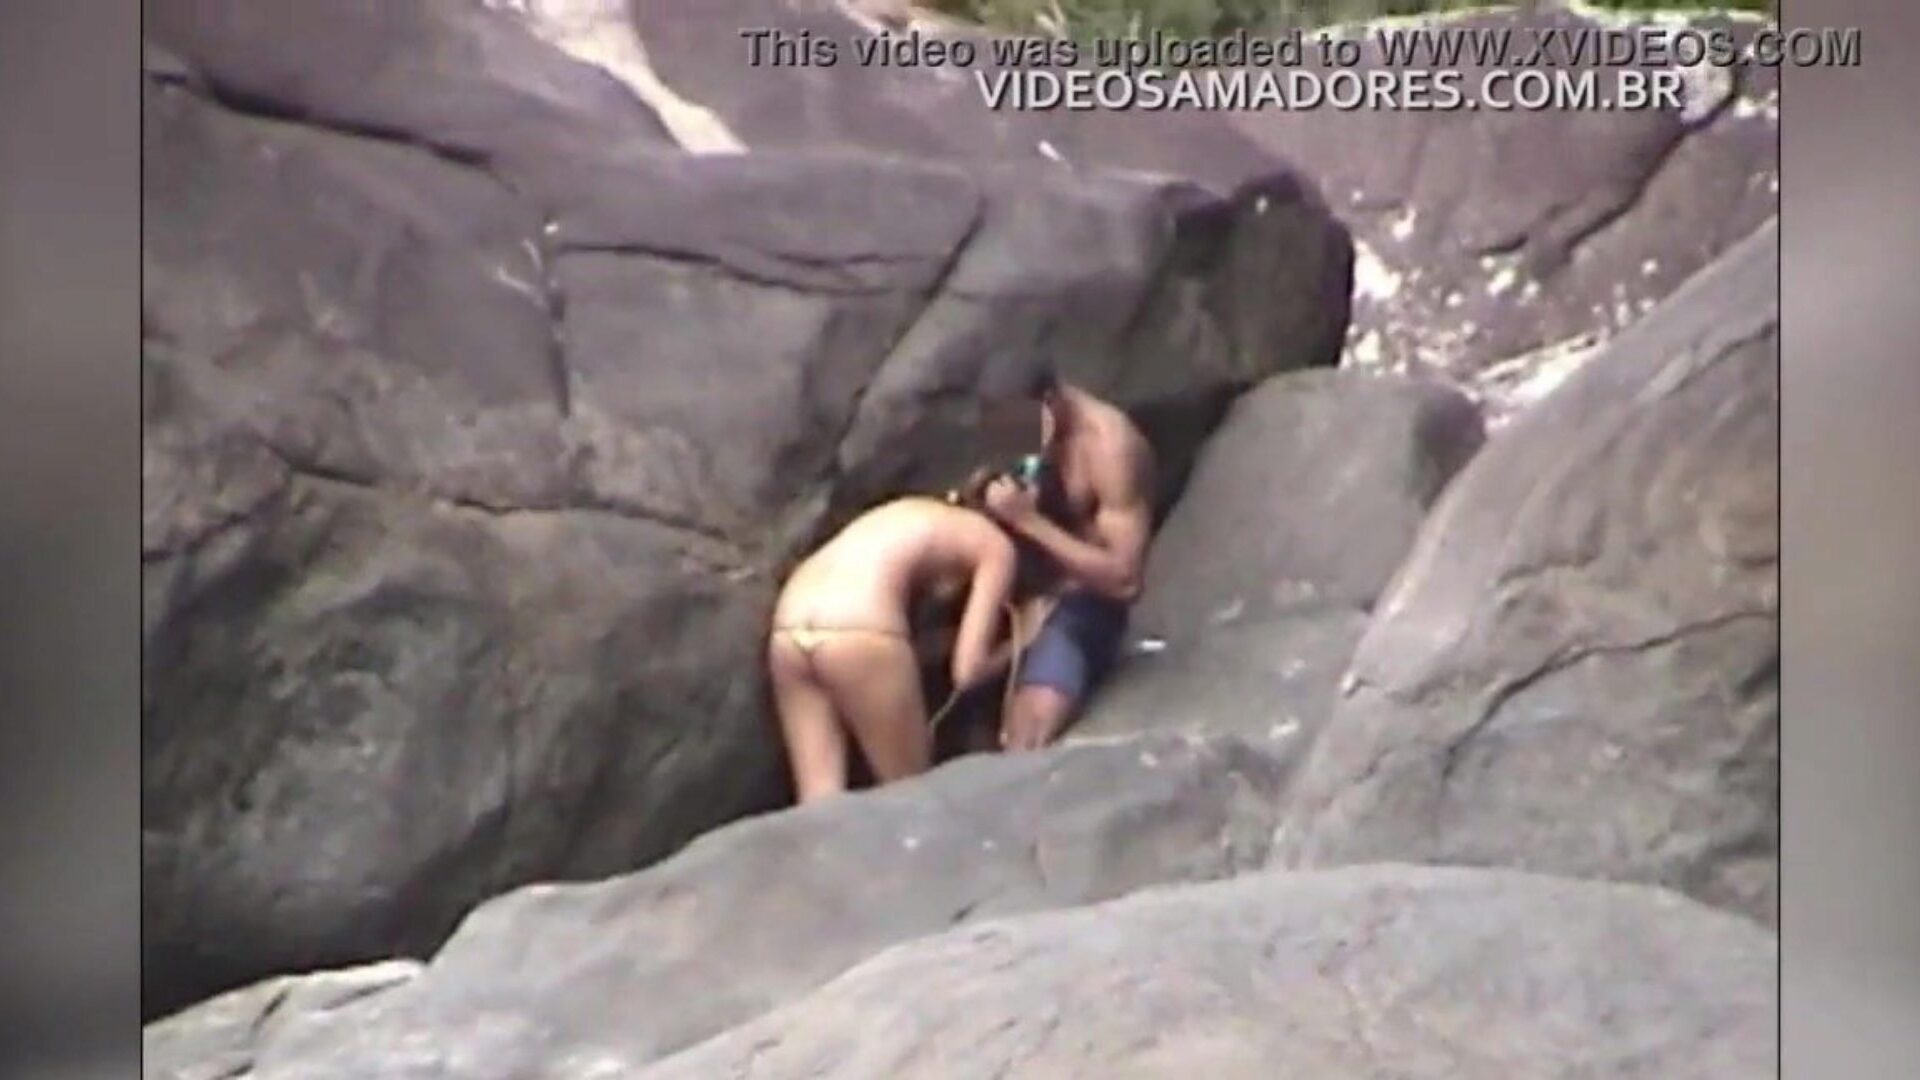 Couple has oral job hookup on the beach and is filmed without realizing it